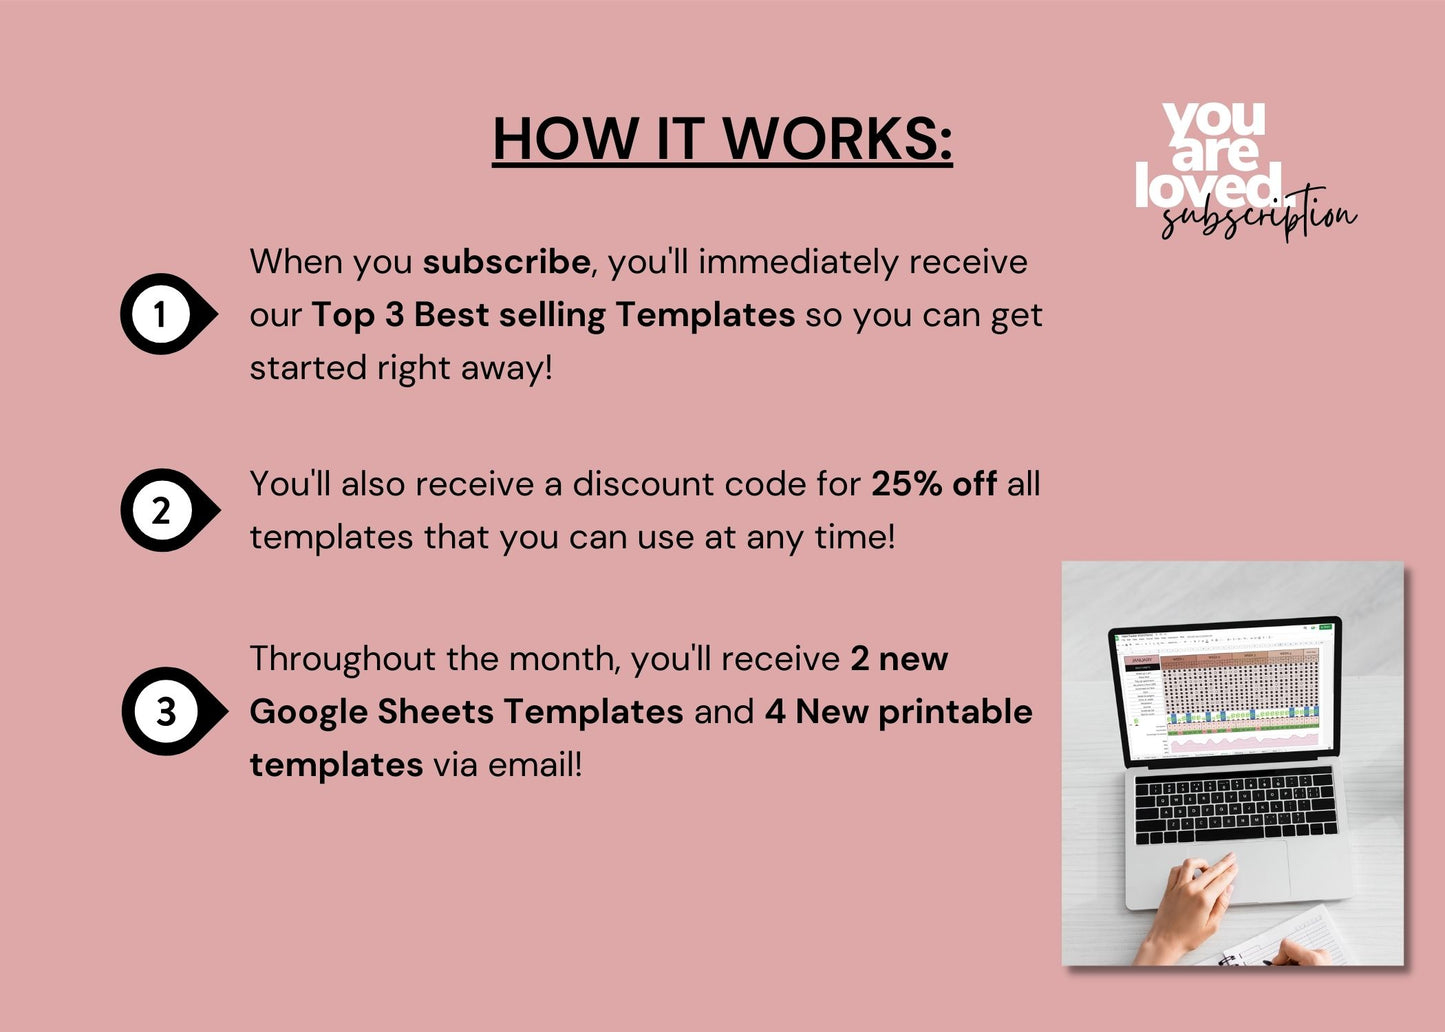 Lifestyle & Productivity | Template Subscription